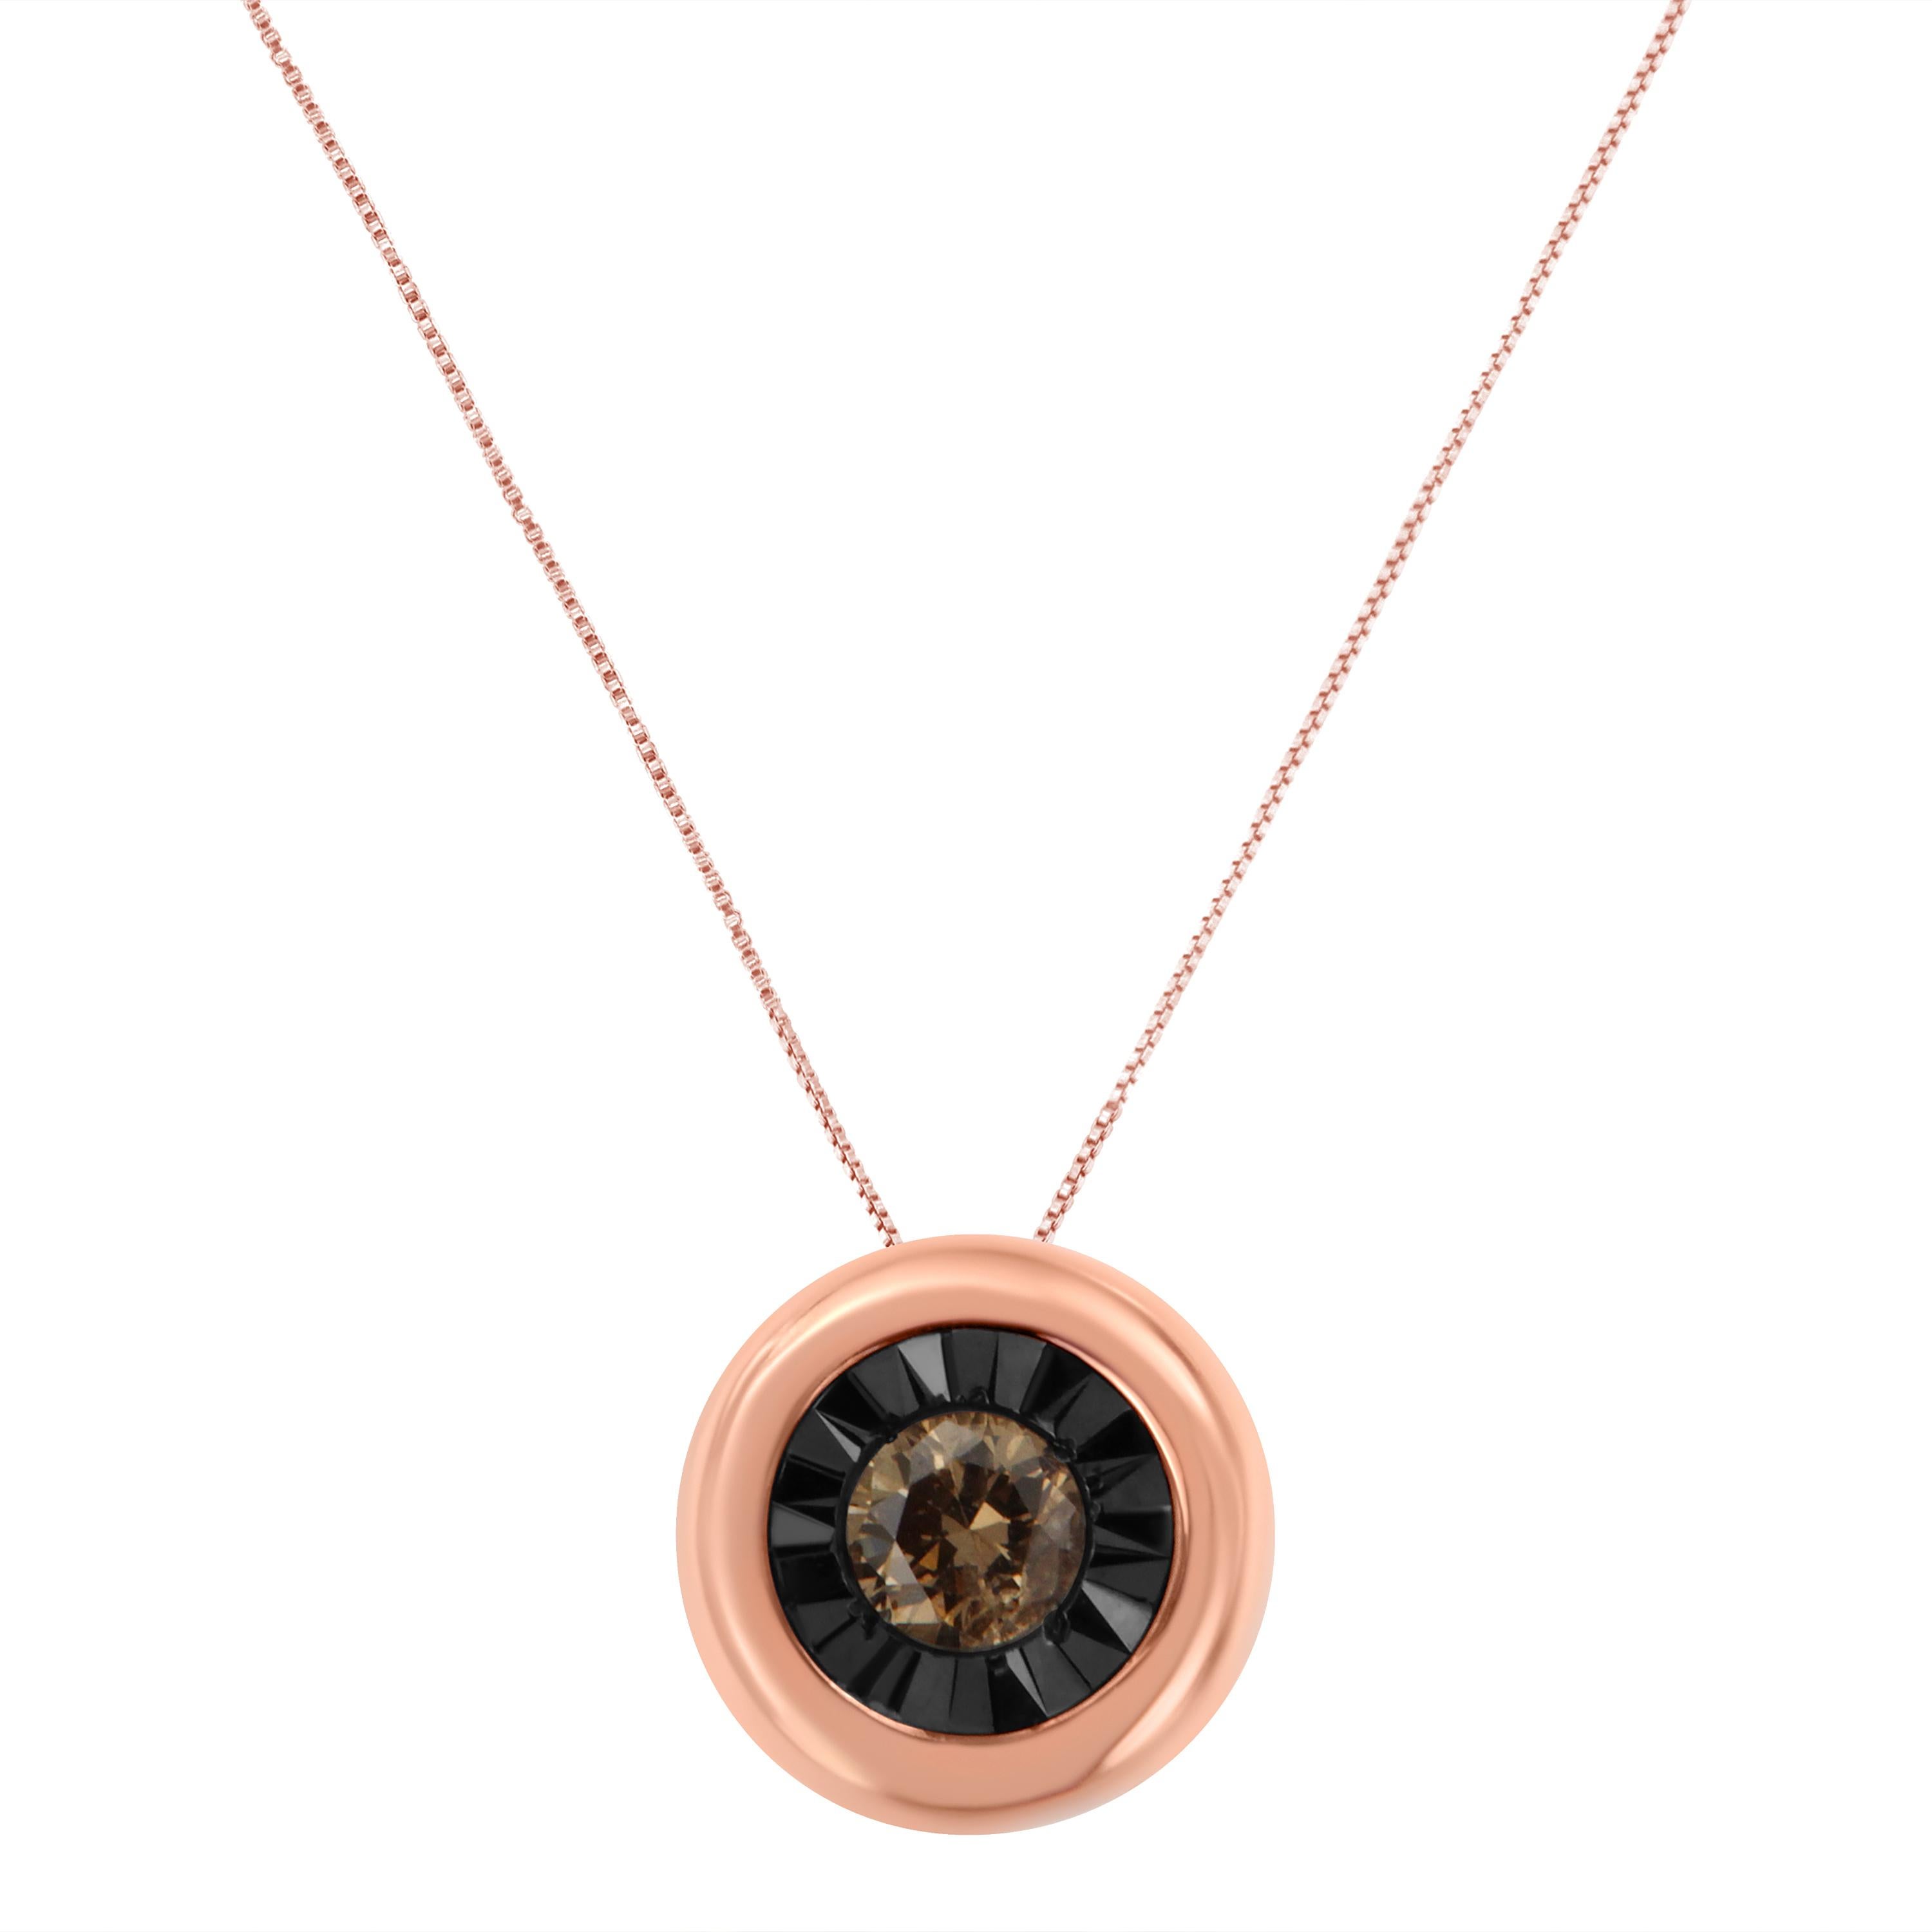 Elegant and unique, this 10k rose gold pendant is a perfect complement for any occasion. The pendant showcases a stunning round cut champagne diamond that contrasts against a black rhodium miracle setting. 1/10ct TDW sparkles in this necklace